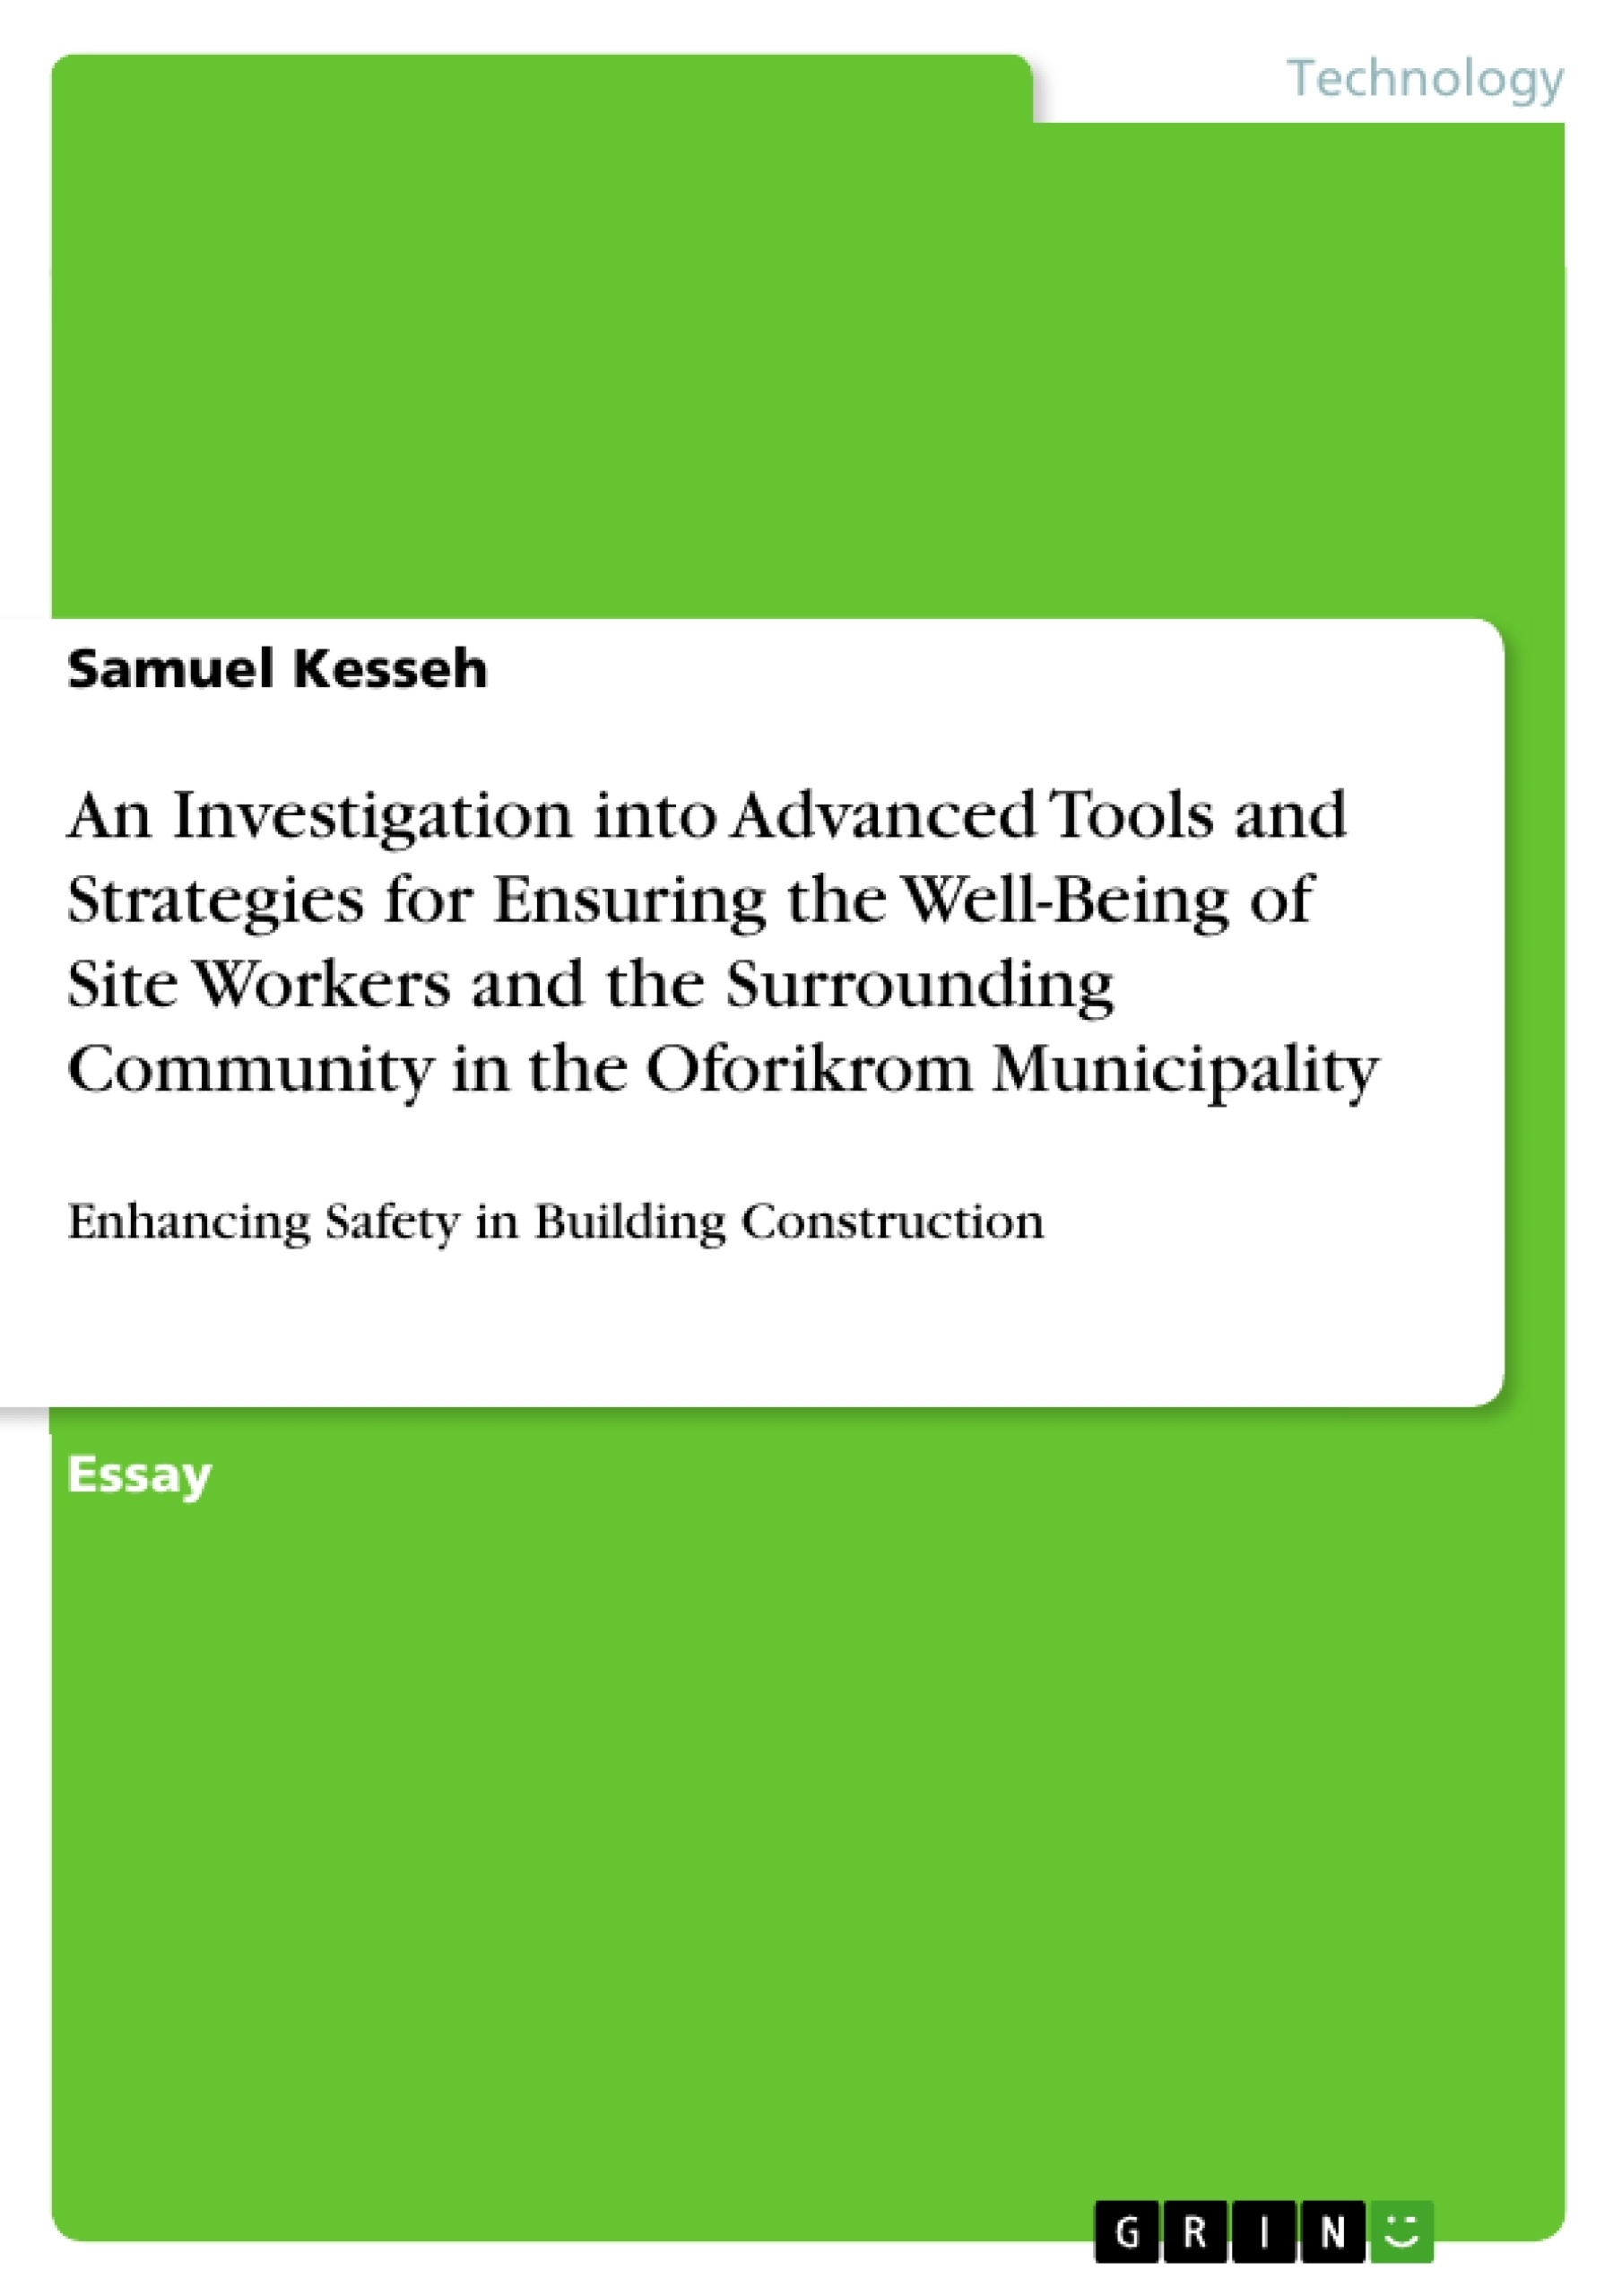 Título: An Investigation into Advanced Tools and Strategies for Ensuring the Well-Being of Site Workers and the Surrounding Community in the Oforikrom Municipality